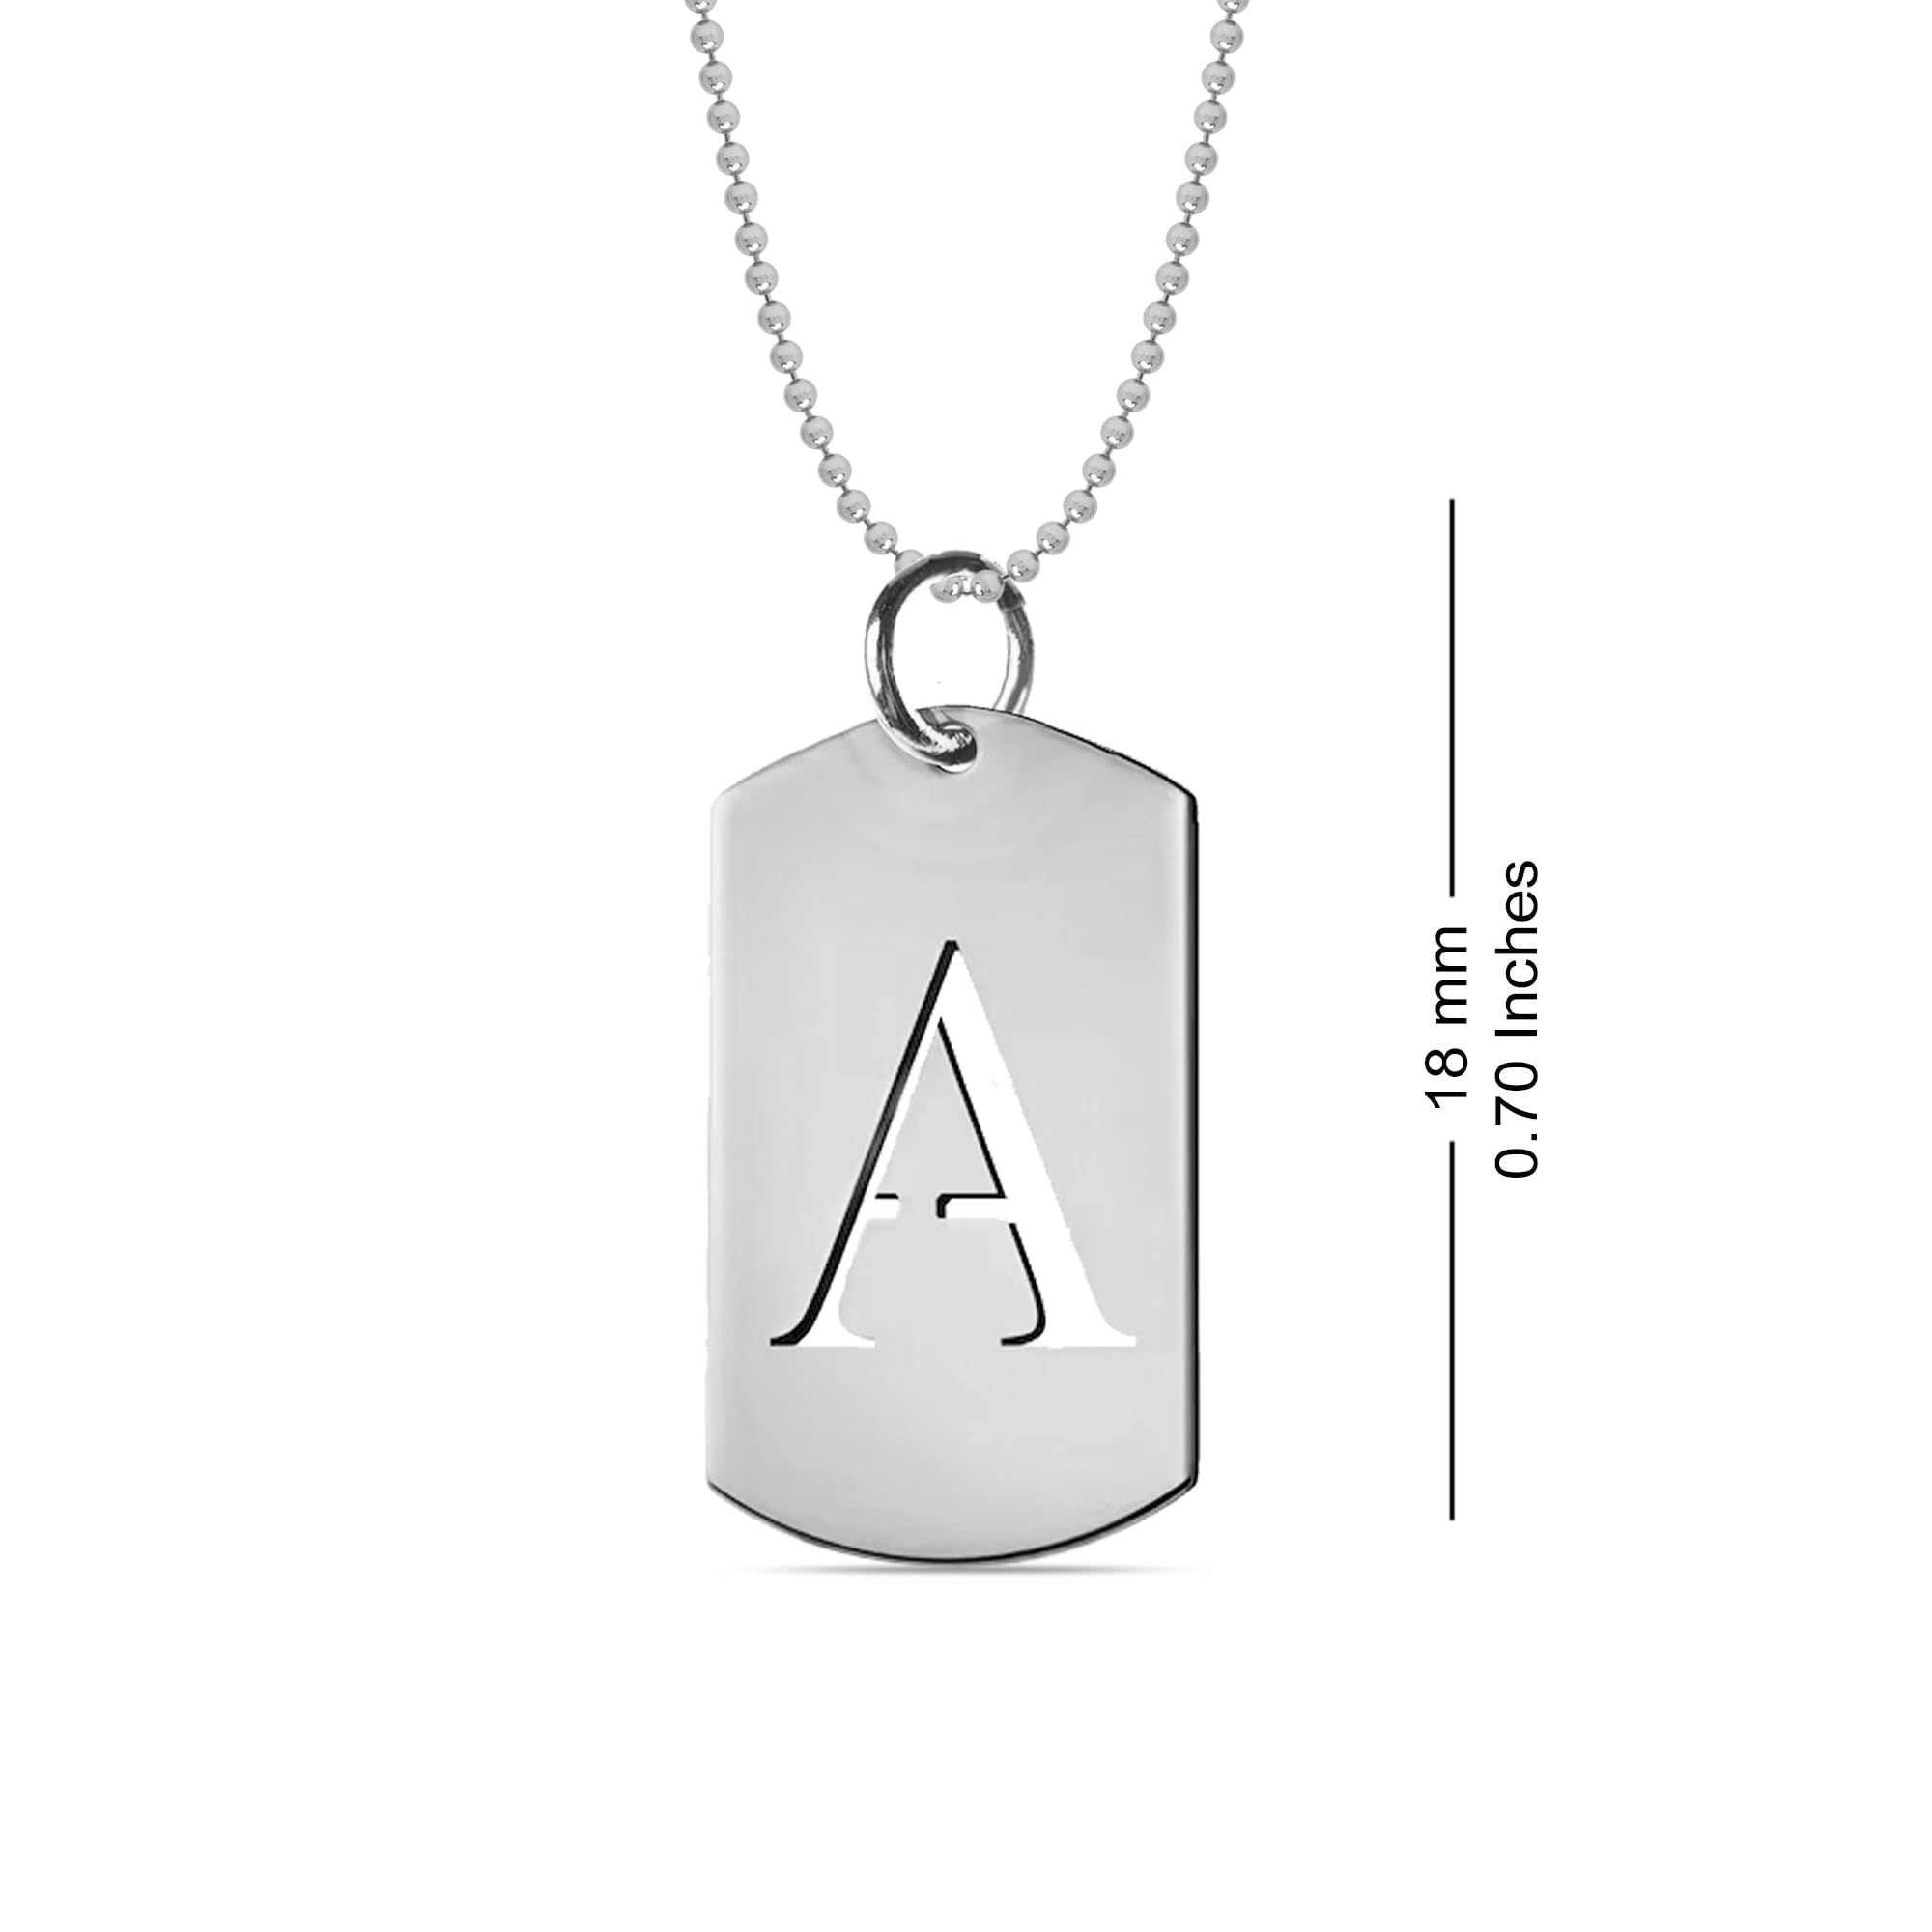 Personalised 925 Sterling Silver Cut Out Initial Mini Pendant Necklace for Men and Women